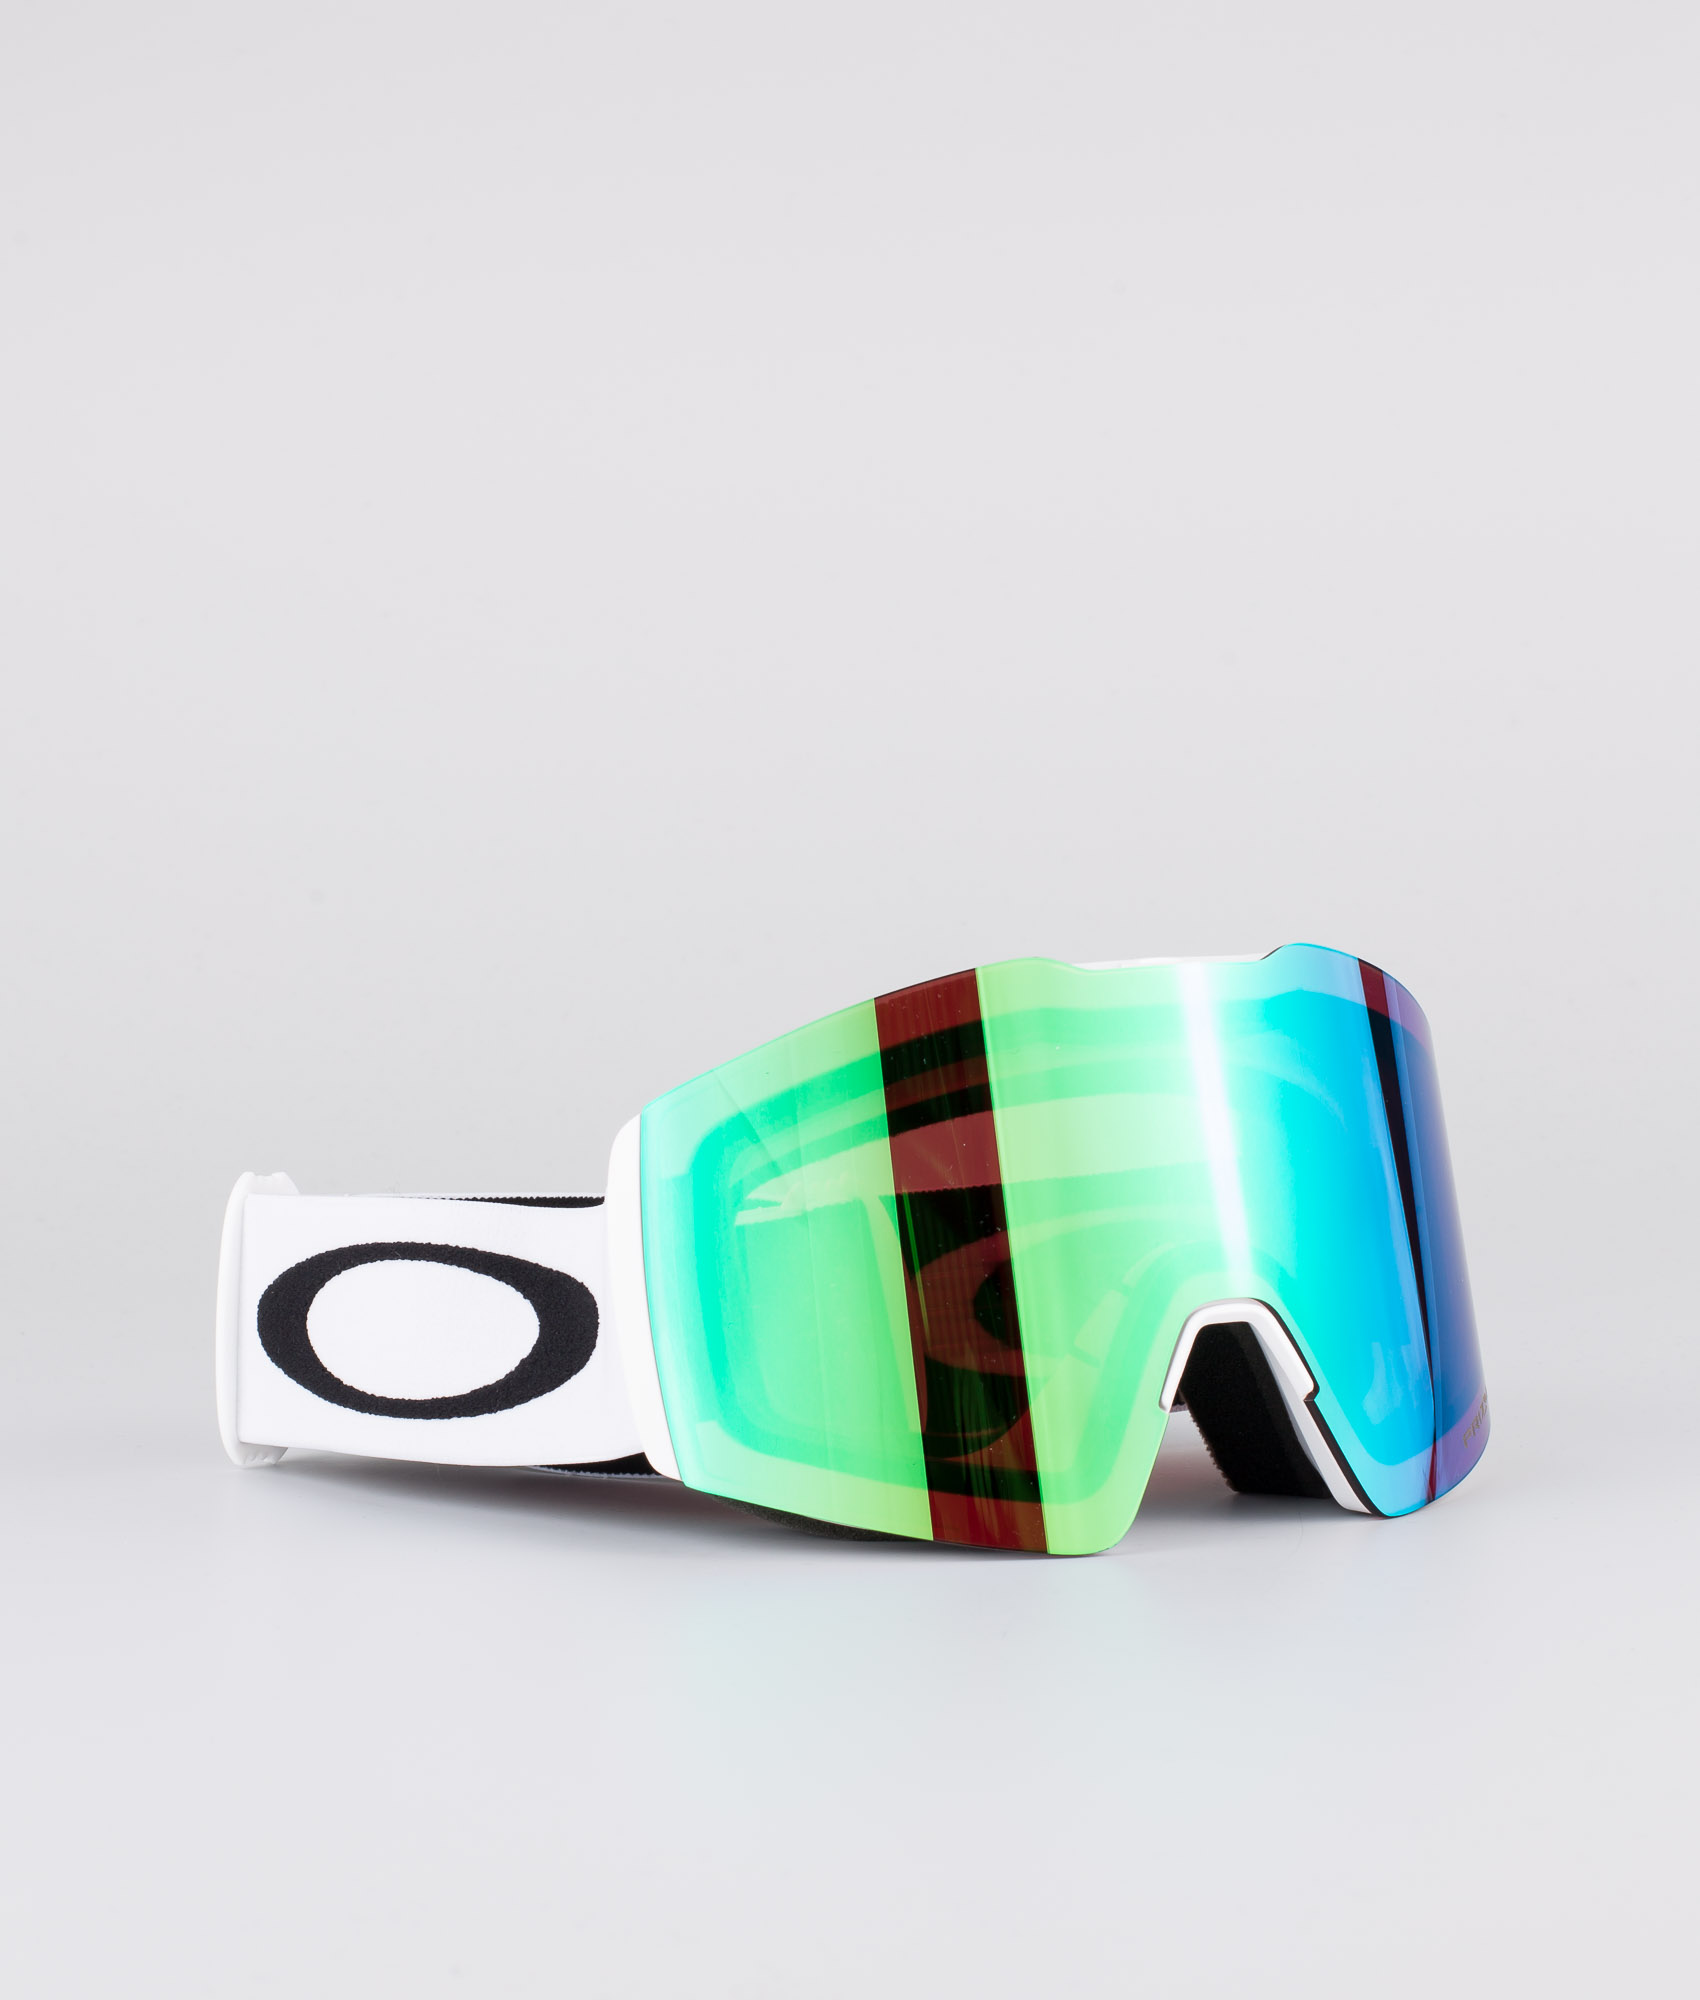 oakley prizm react goggles for sale